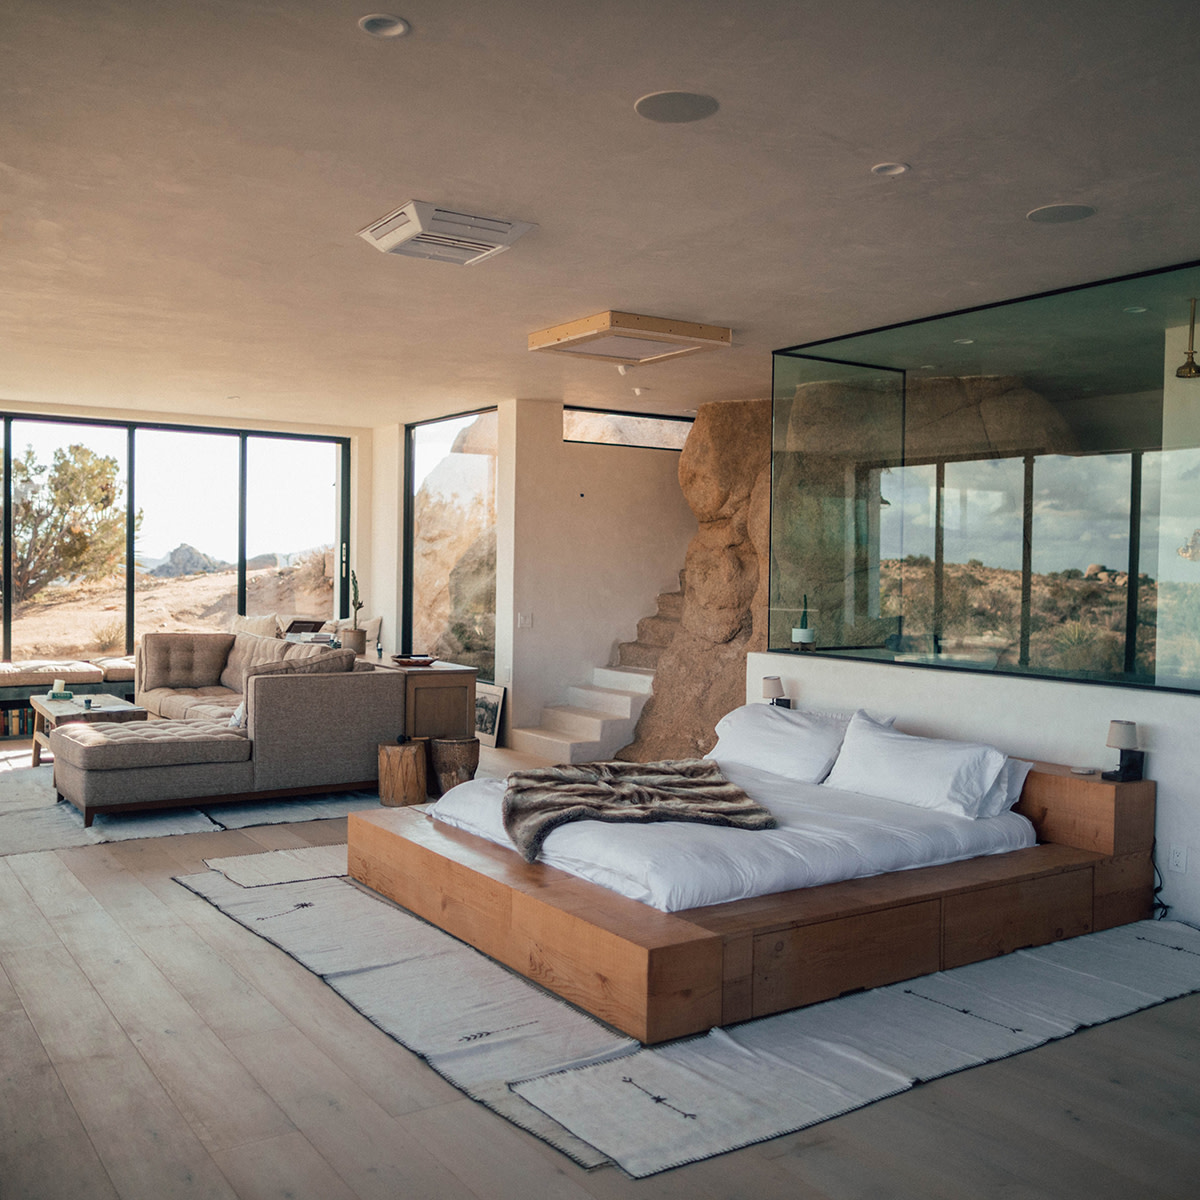 bedroom in the desert in a hotel room with muted natural colors